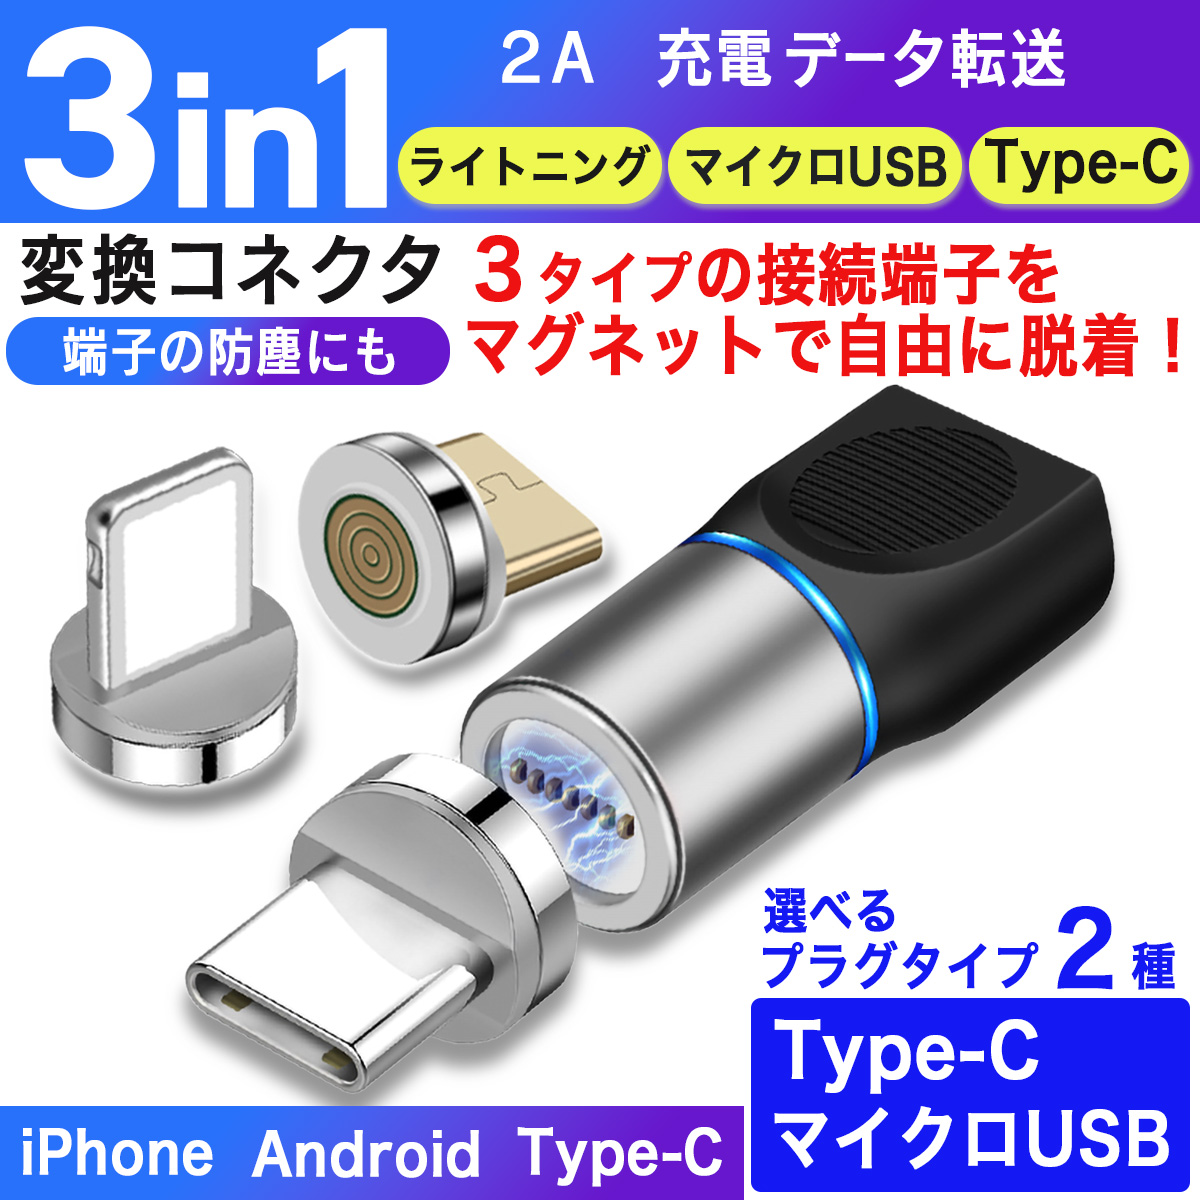 3in1 充電 変換アダプター iPhone Android USB 